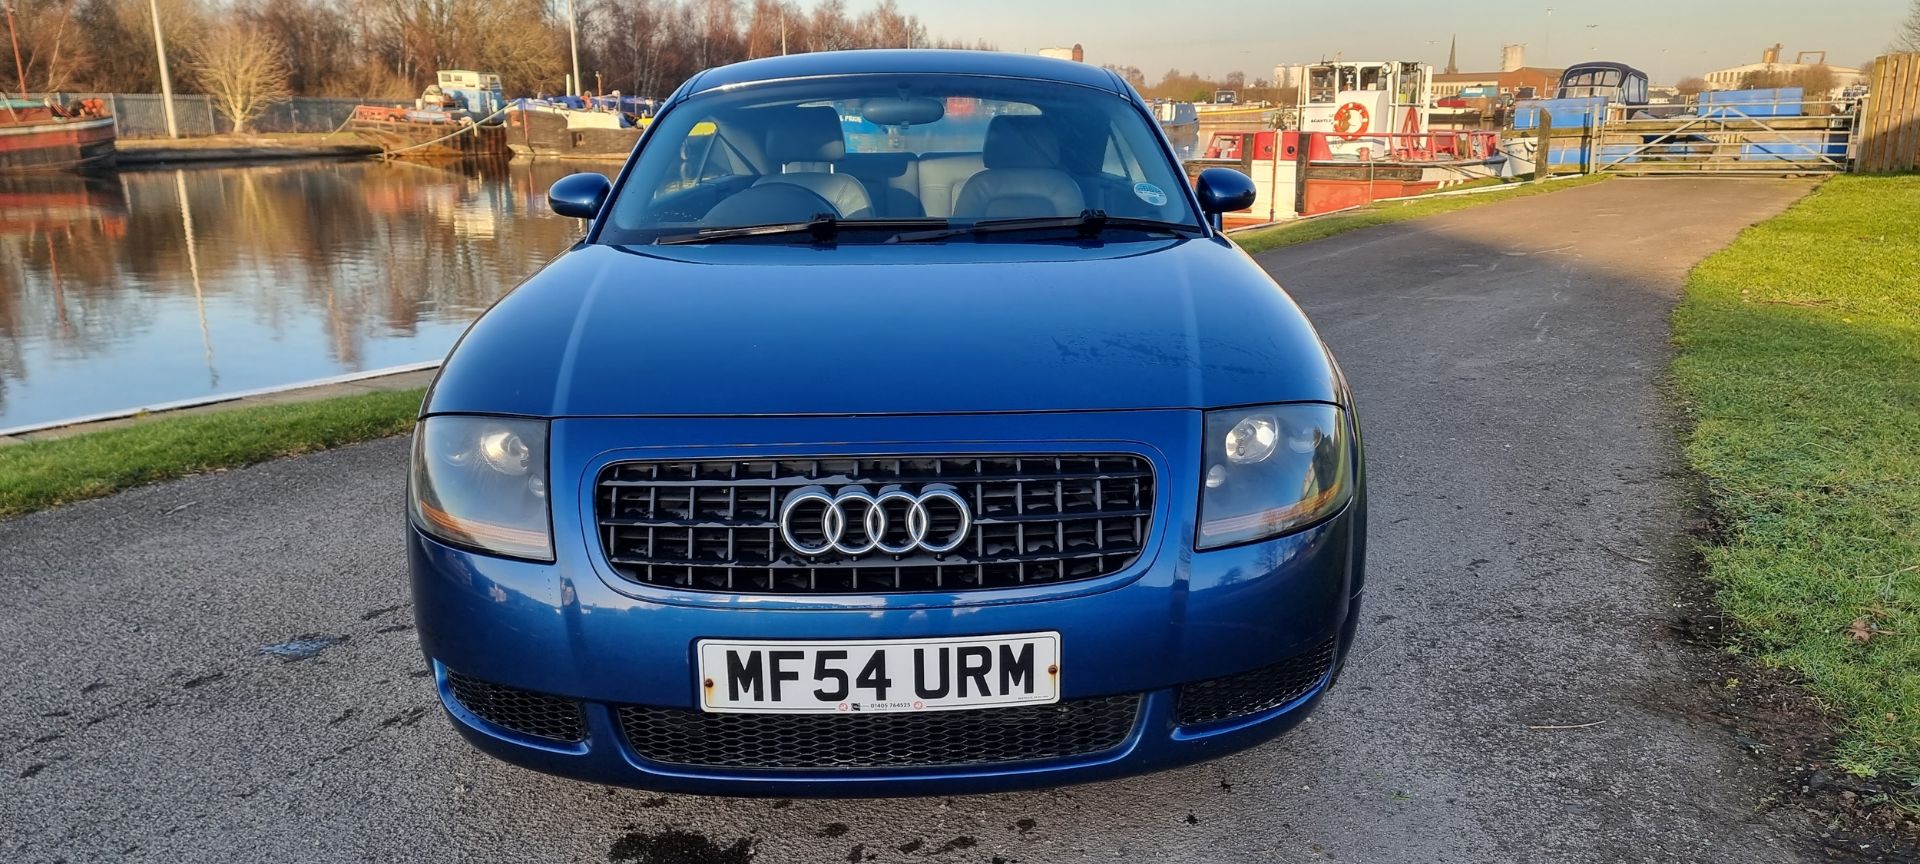 2004 Audi TT Coupe, 180hp, 1781cc. Registration number MF54 URM. Engine number TRUZZZ8N651005485. - Image 3 of 18